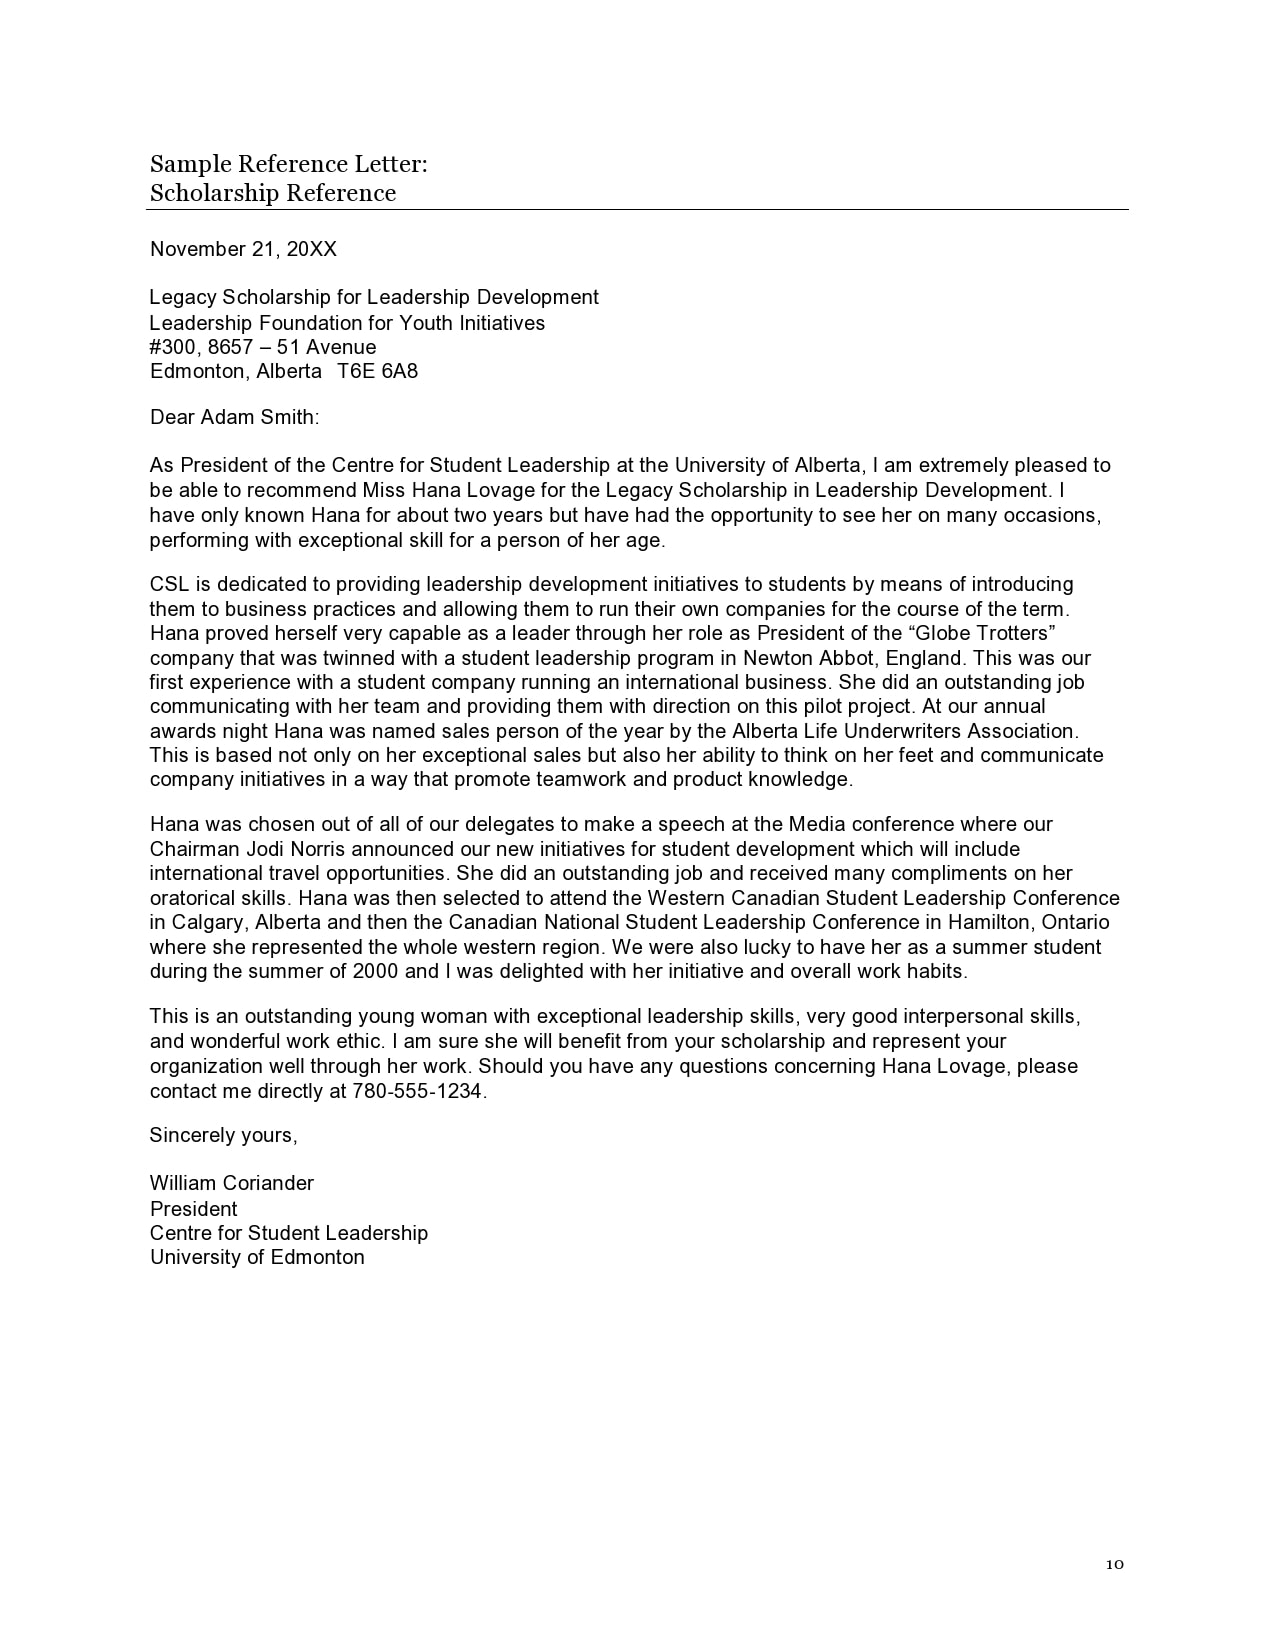 Sample Of Recommendation Letter For Scholarship from templatearchive.com